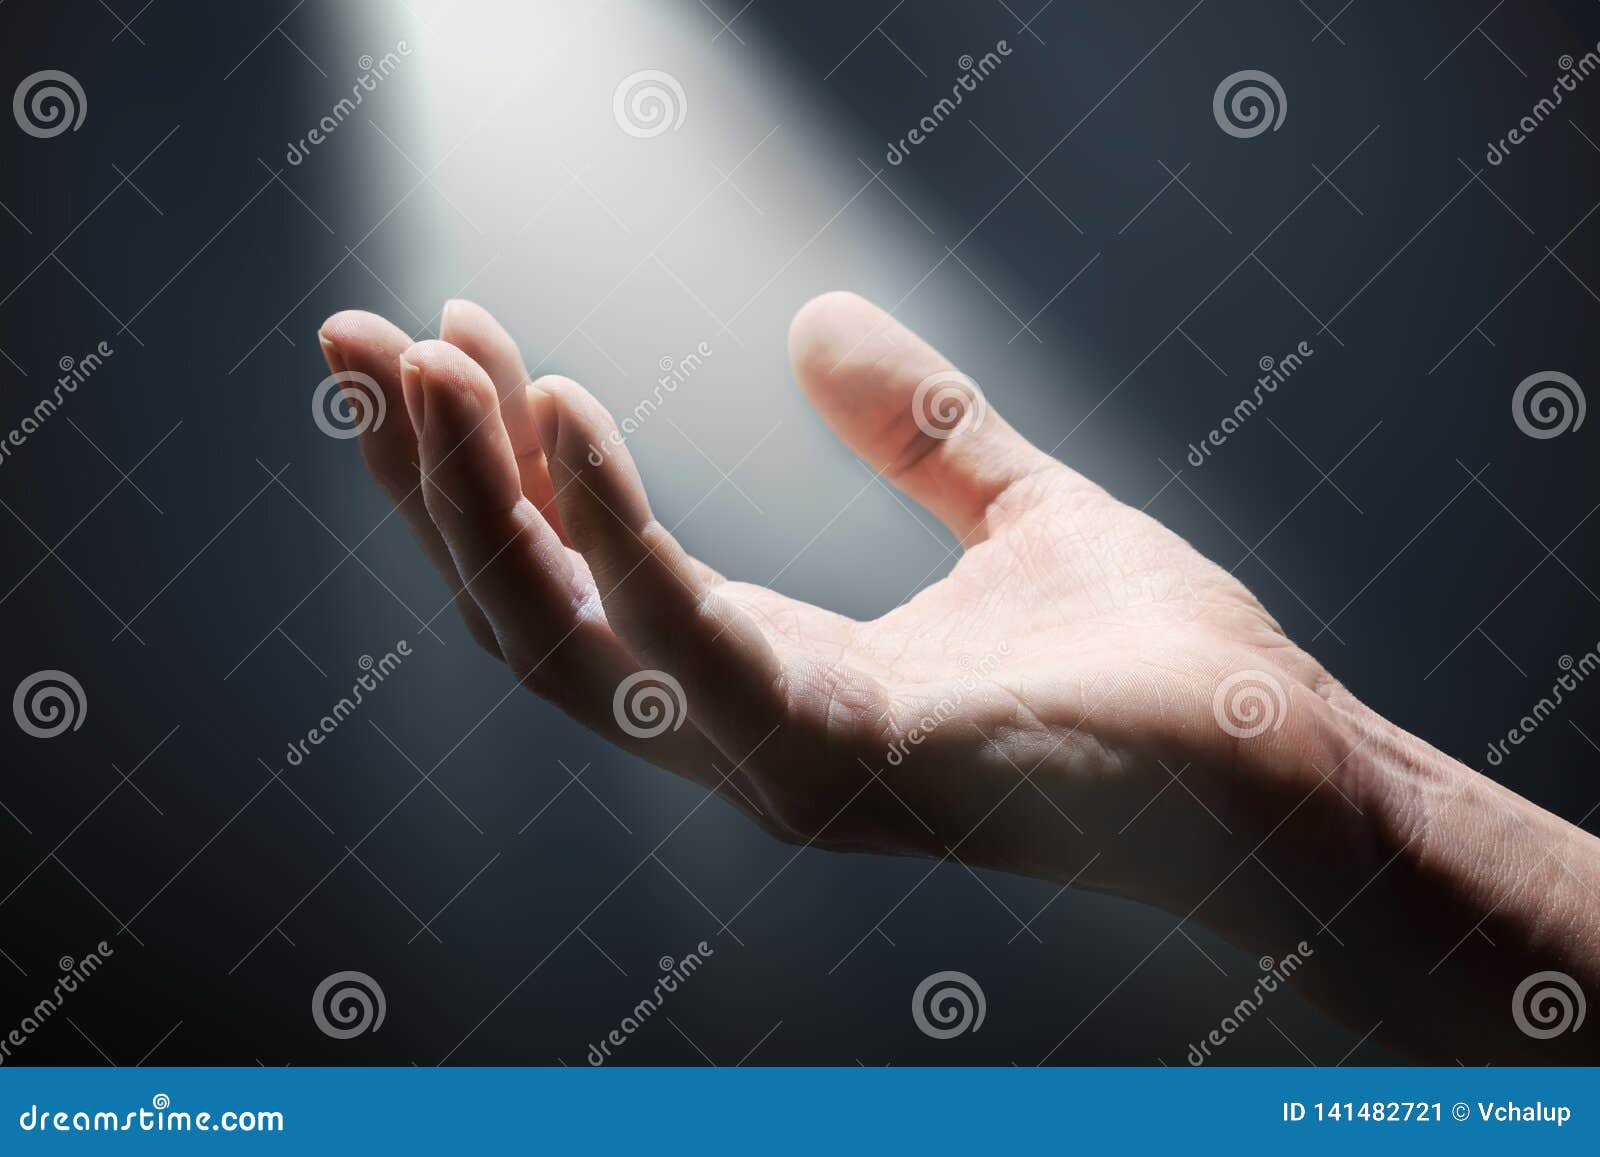 bright light rays shihing on man`s hand in darkness.